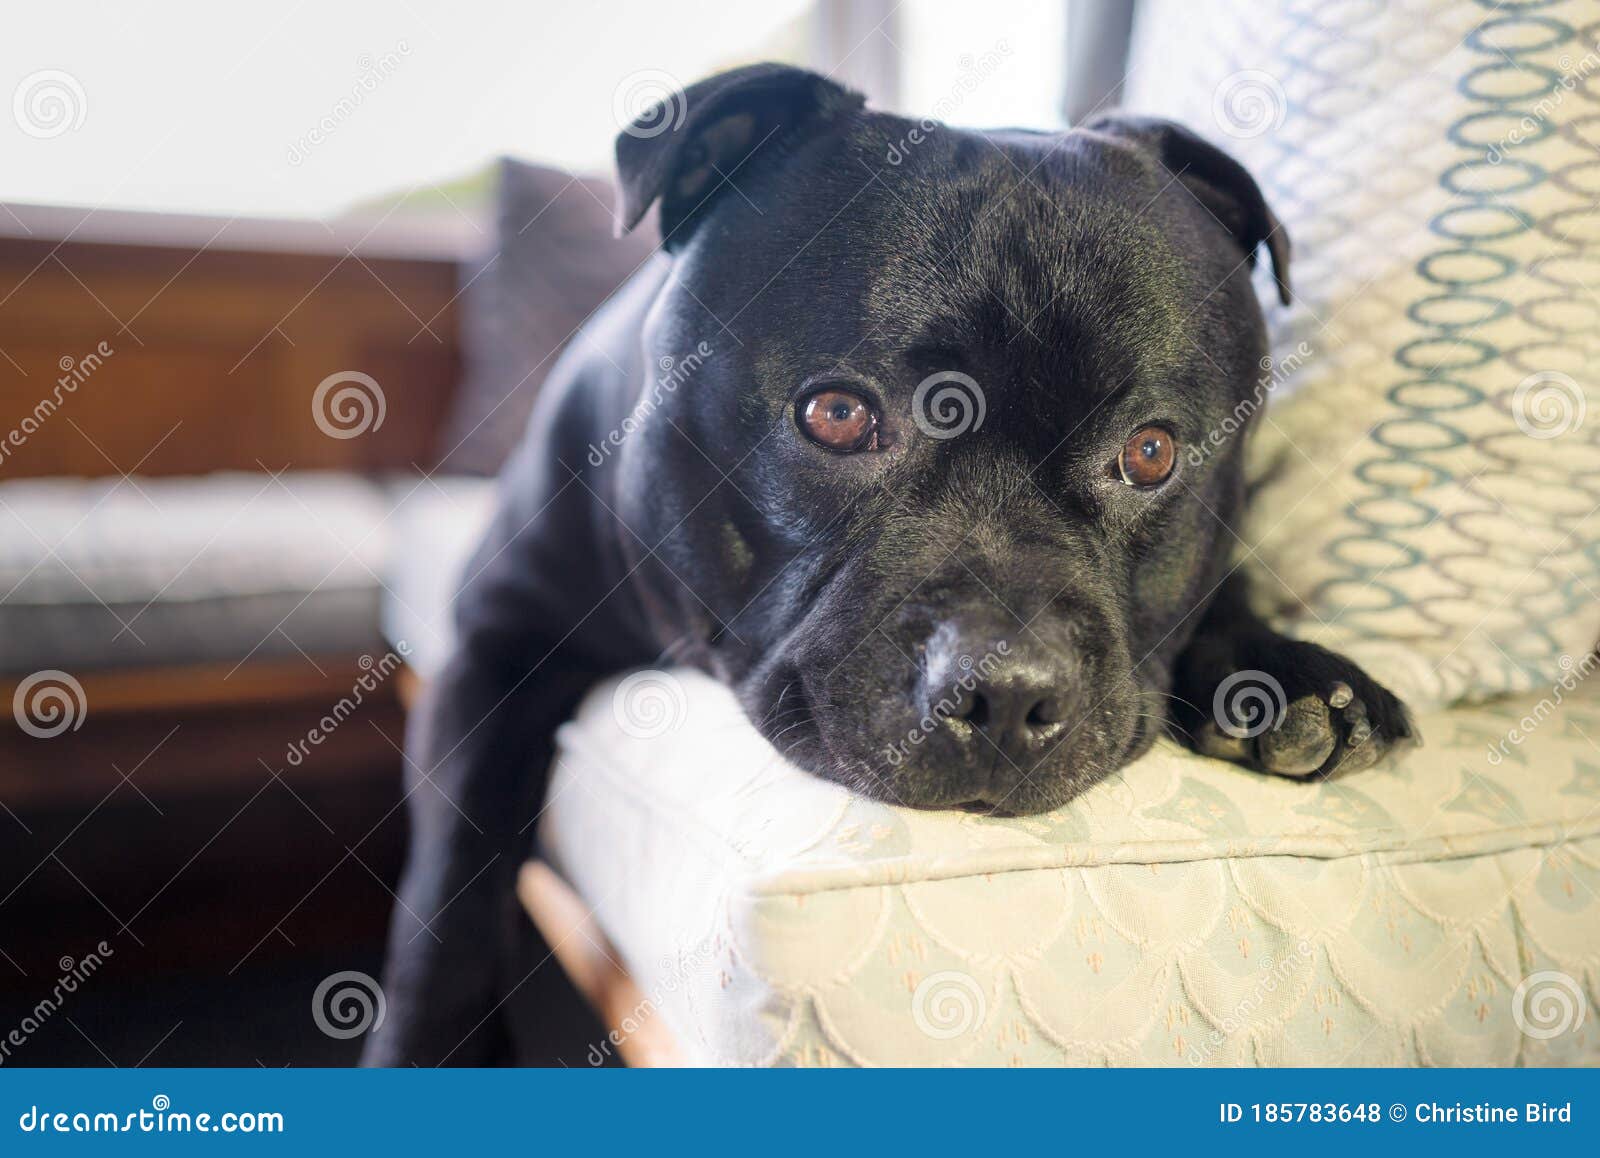 Cute Black Staffordshire Bull Terrier Dog With Large Round